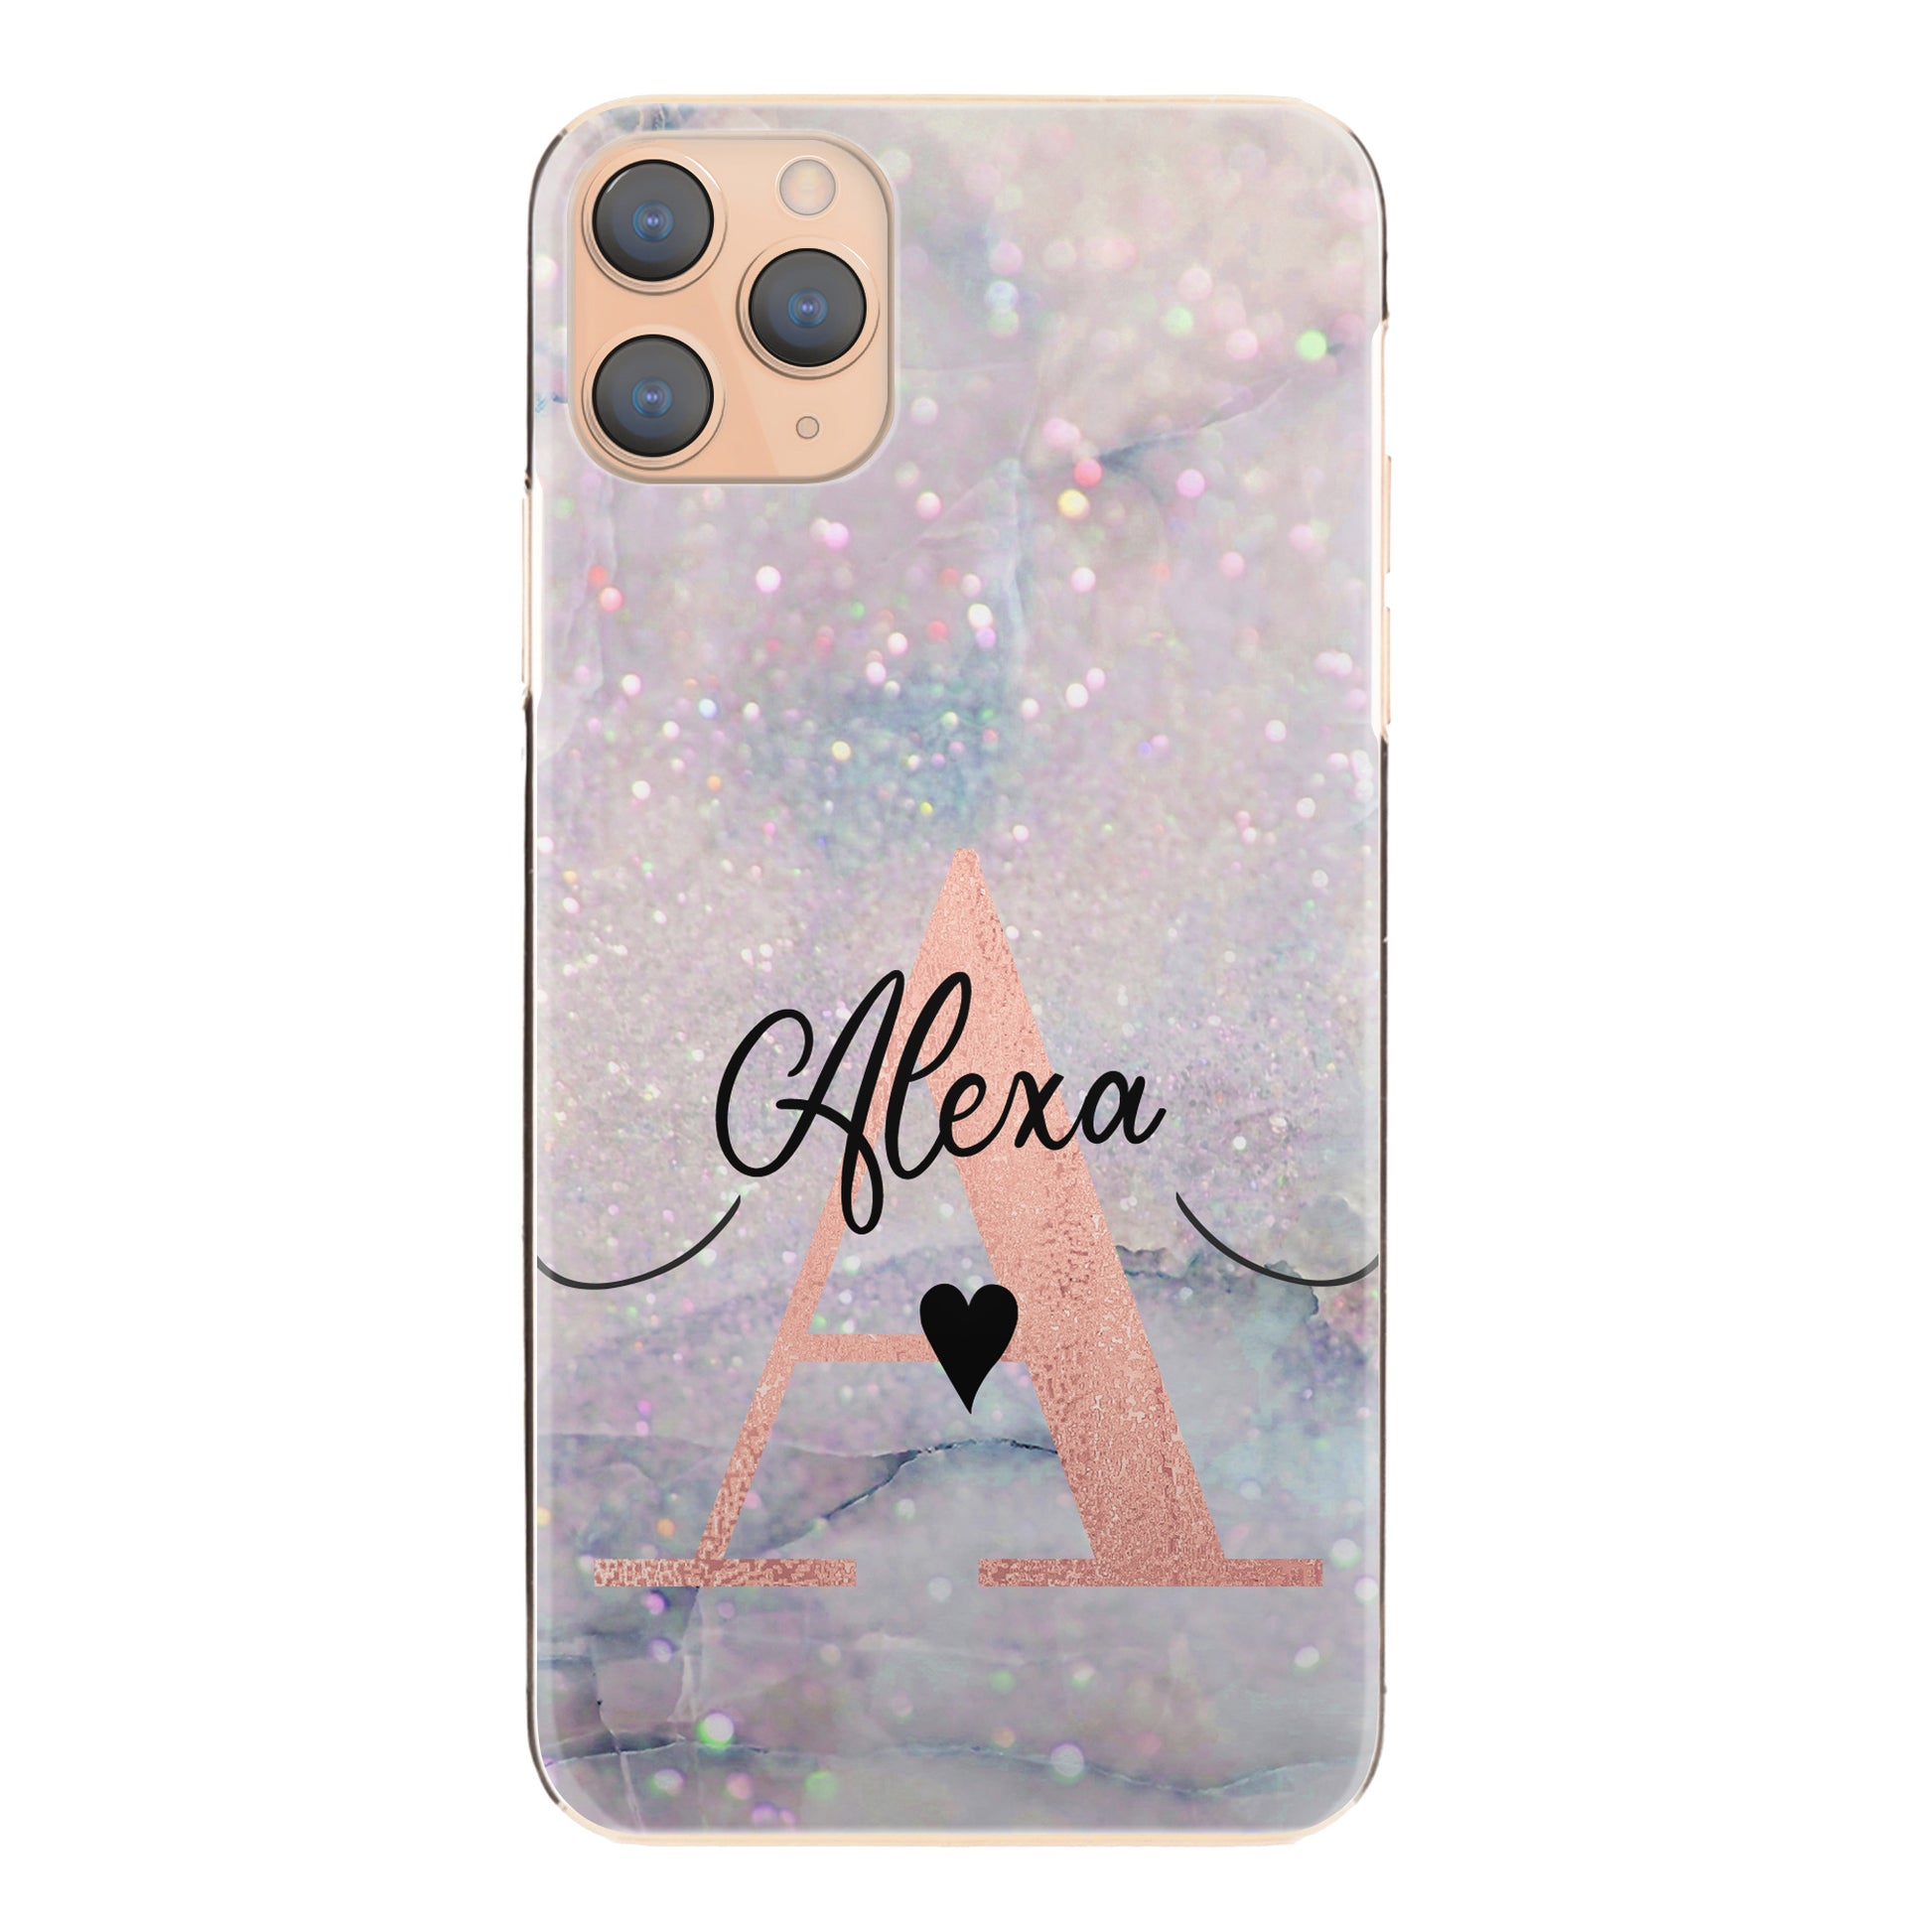 Personalised Huawei Phone Hard Case with Stylish Heart Text and Pink Initial on Textured Glitter Effect